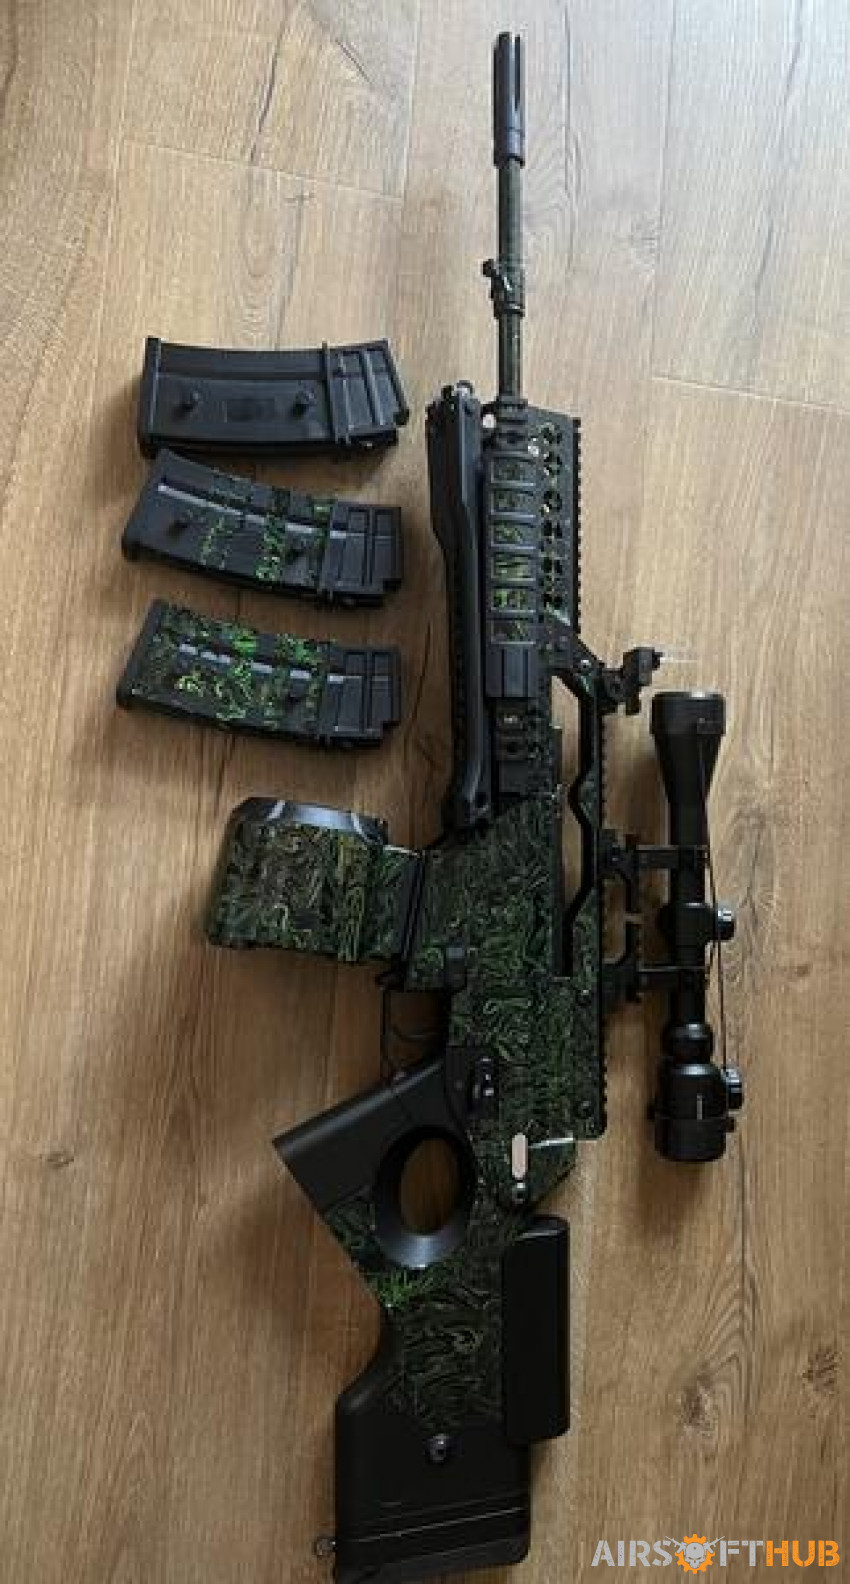 JG G608 w/drum mag and skin - Used airsoft equipment